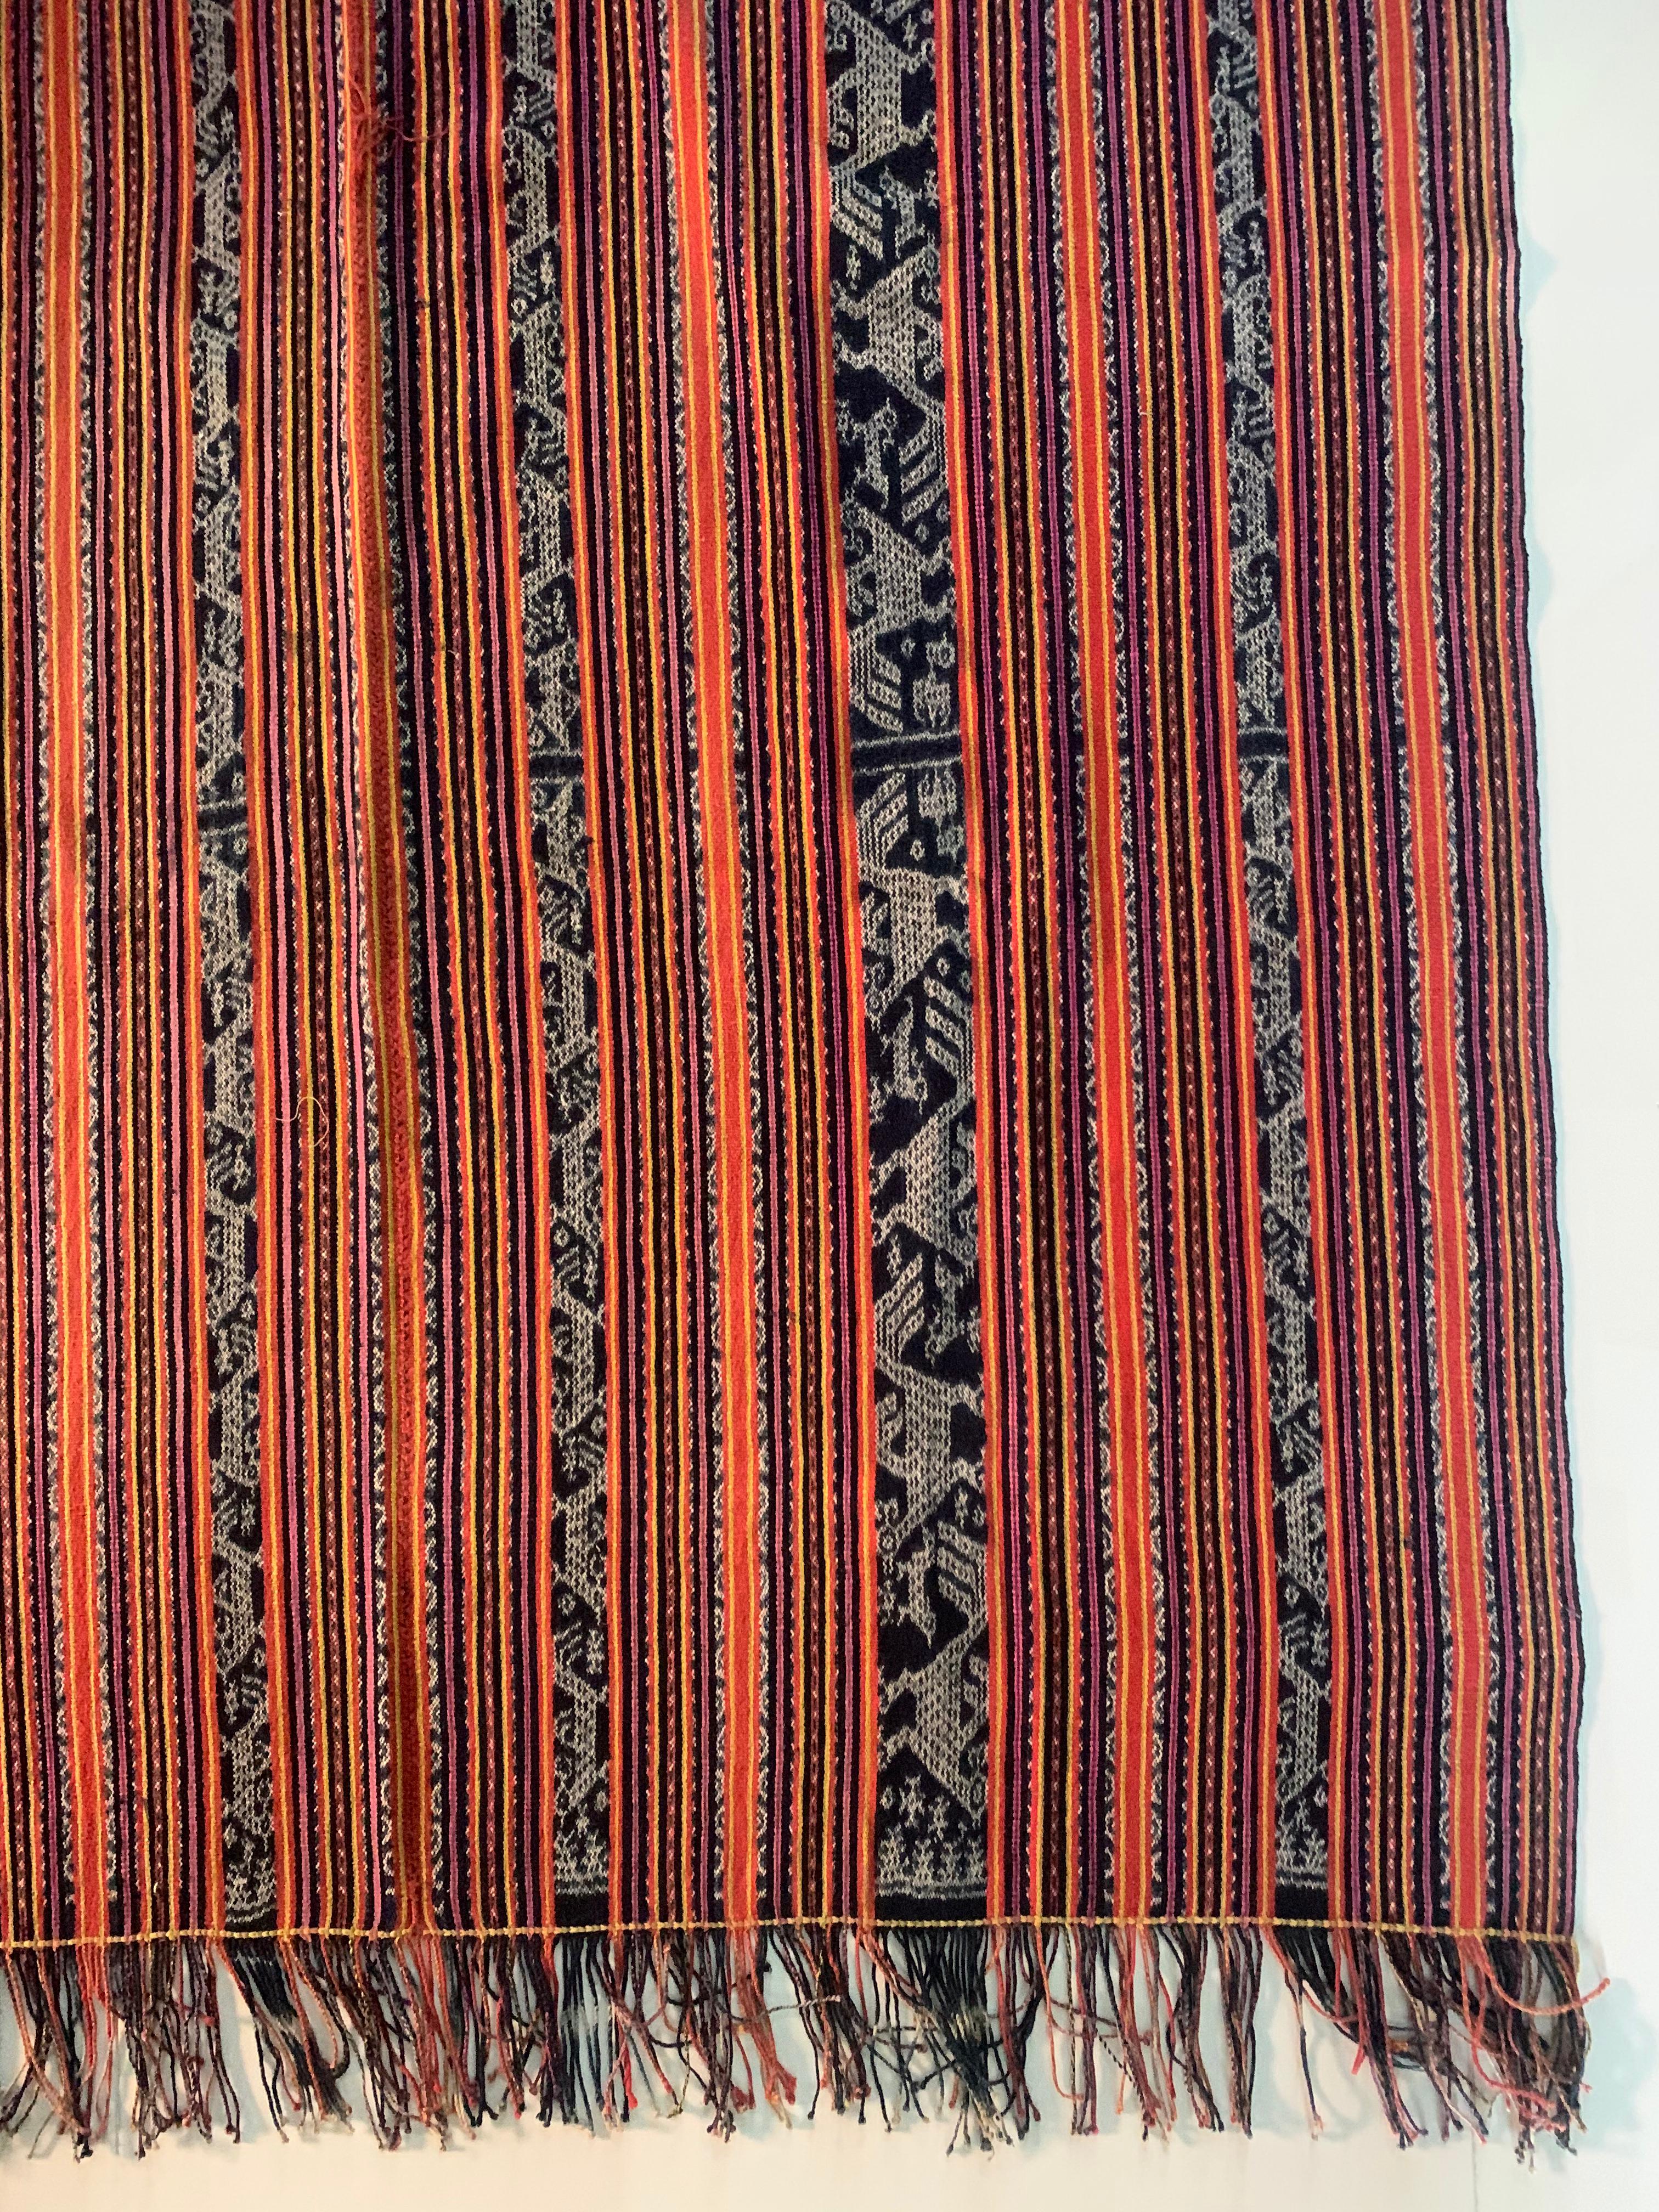 Late 20th Century Ikat Textile from Timor with Stunning Tribal Motifs & Colours, Indonesia